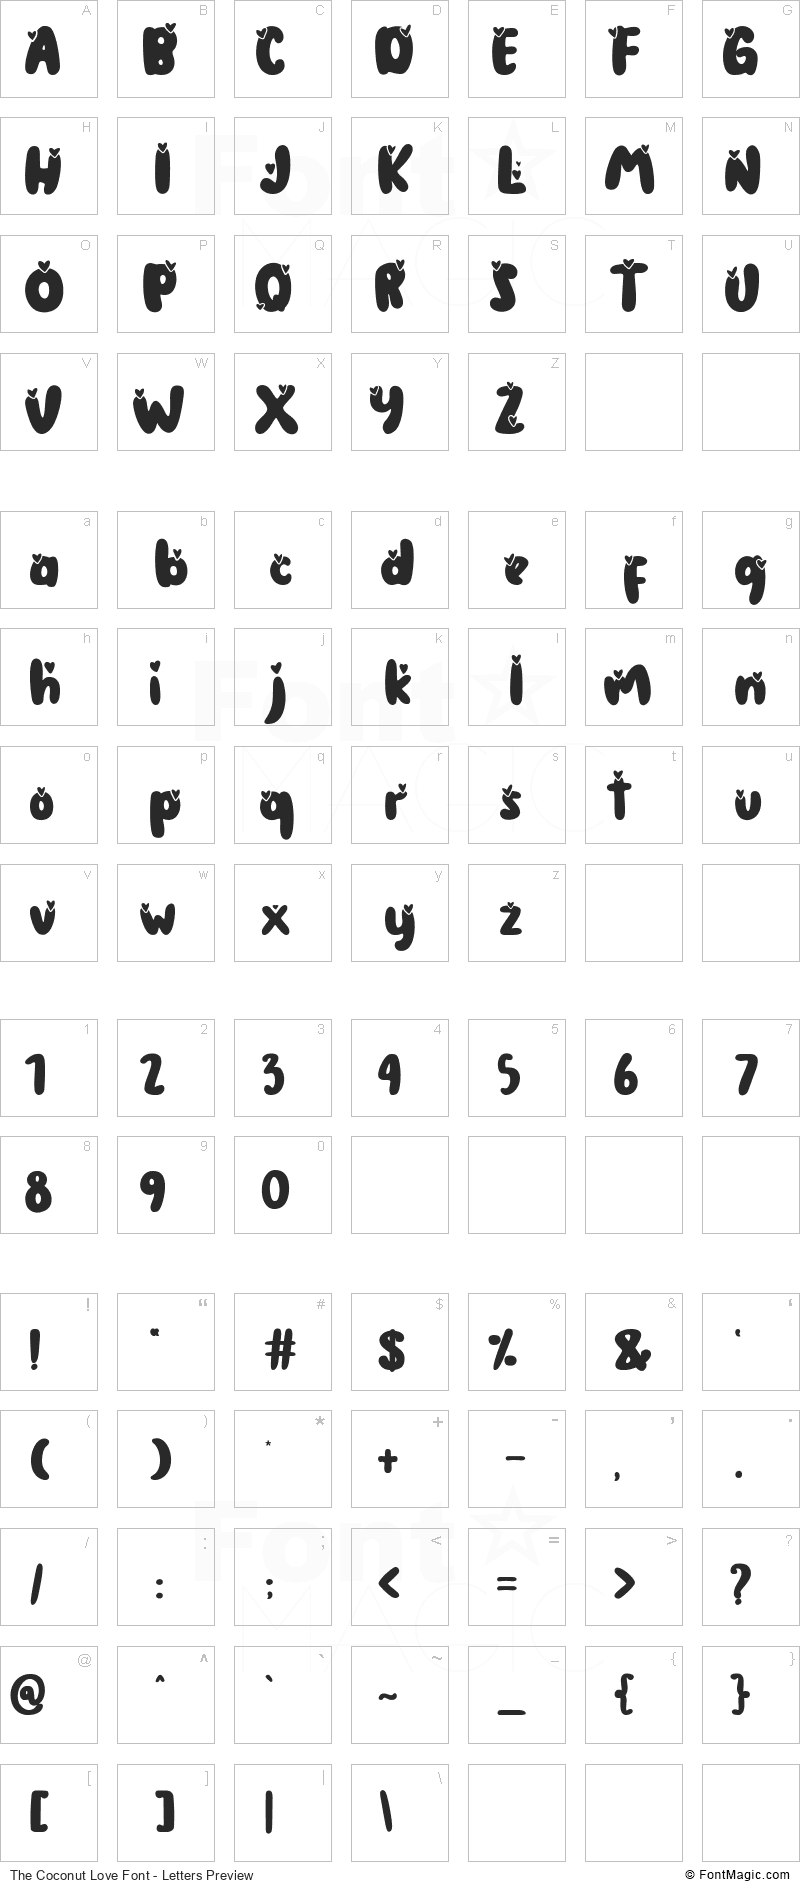 The Coconut Love Font - All Latters Preview Chart